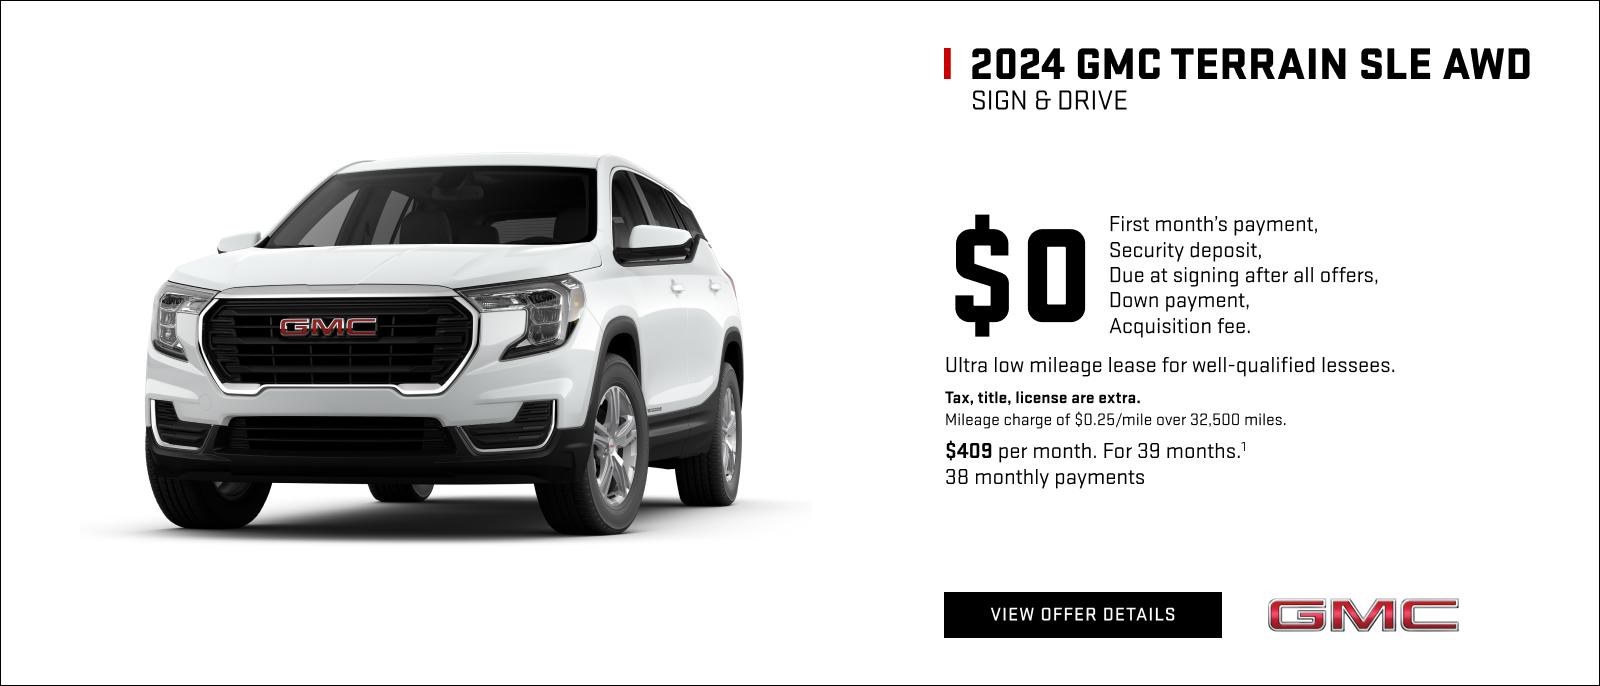 SIGN & DRIVE

$0
FIRST MONTH'S PAYMENT
SECURITY DEPOSIT
DUE AT LEASE SIGNING AFTER ALL OFFERS
DOWN PAYMENT
ACQUISITION FEE

Ultra low mileage lease for well-qualified lessees.

Tax, title, license are extra. Mileage charge of $0.25/mile over 32,500 miles.

$409 per month. For 39 months.1
38 monthly payments